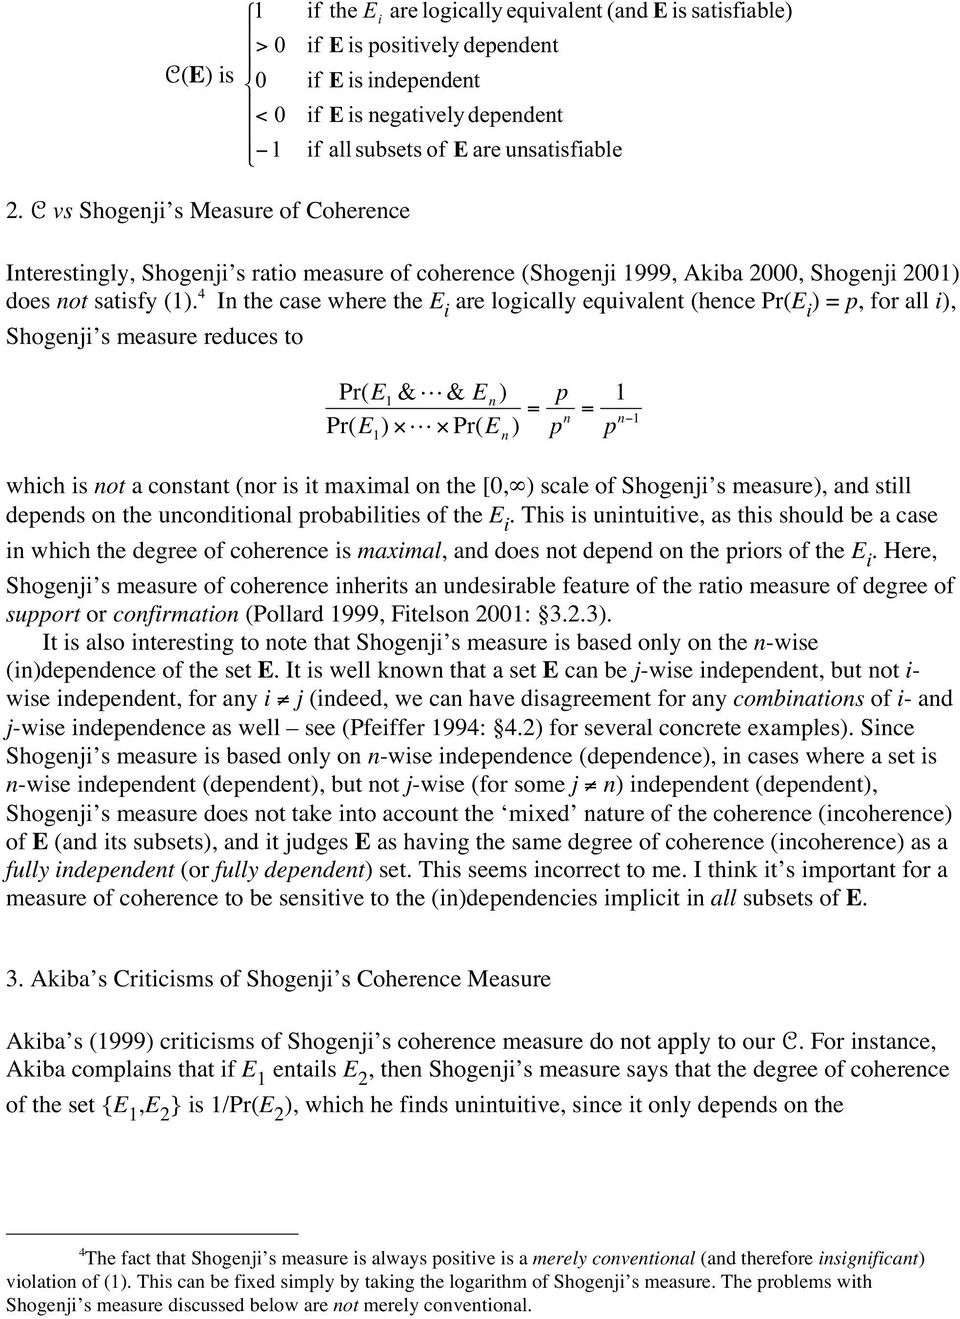 4 In the case where the E are logcally equvalent (hence Pr(E ) p, for all ), Shogenj s measure reduces to Pr(E &L & E n ) Pr(E ) L Pr(E n ) p p n p n whch s not a constant (nor s t maxmal on the [0,